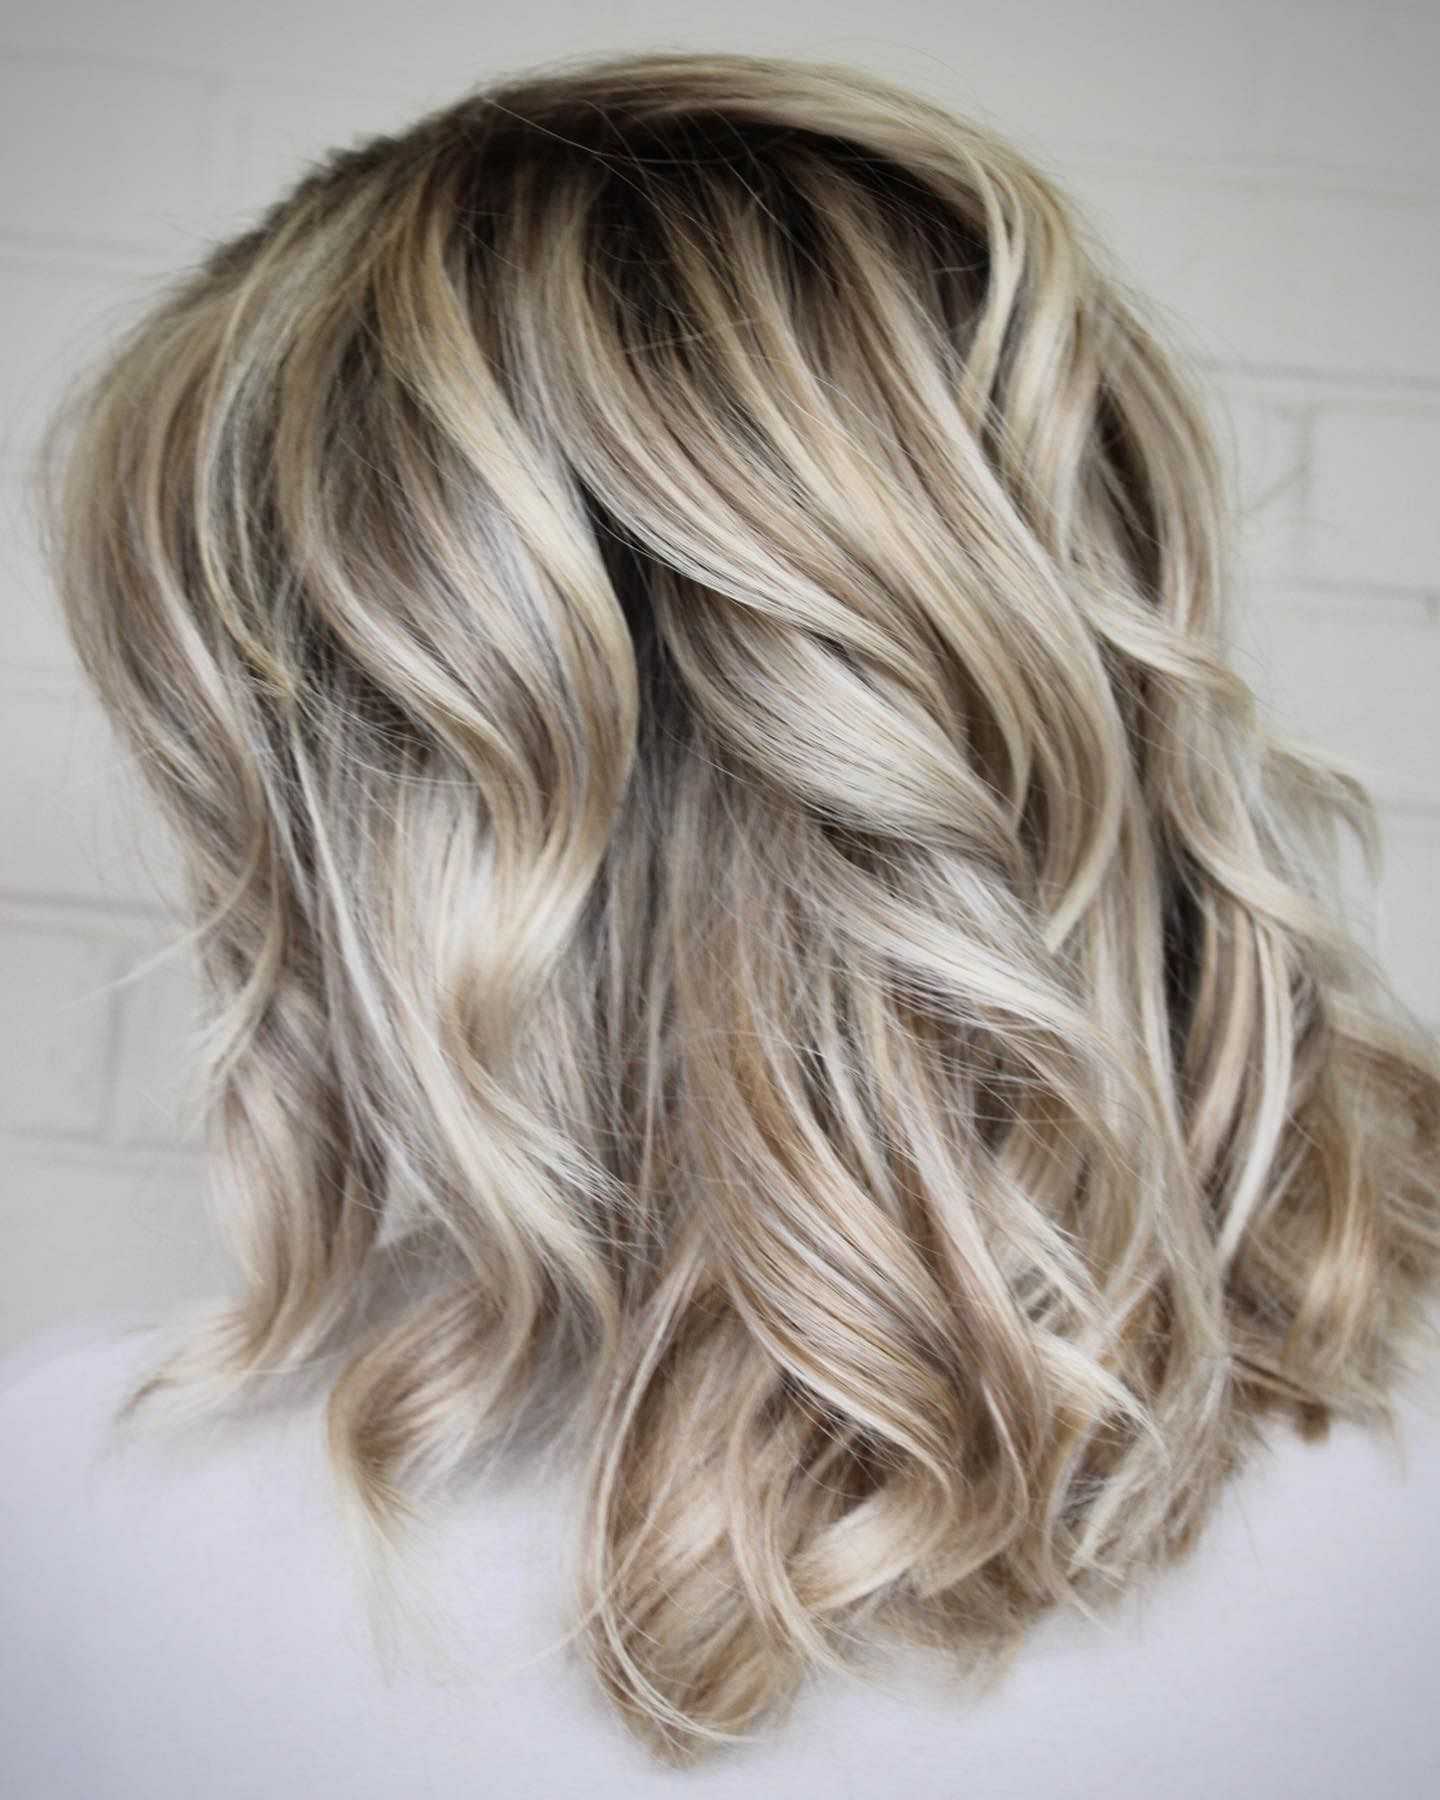 Wavy balayage hairstyle with blond highlights.